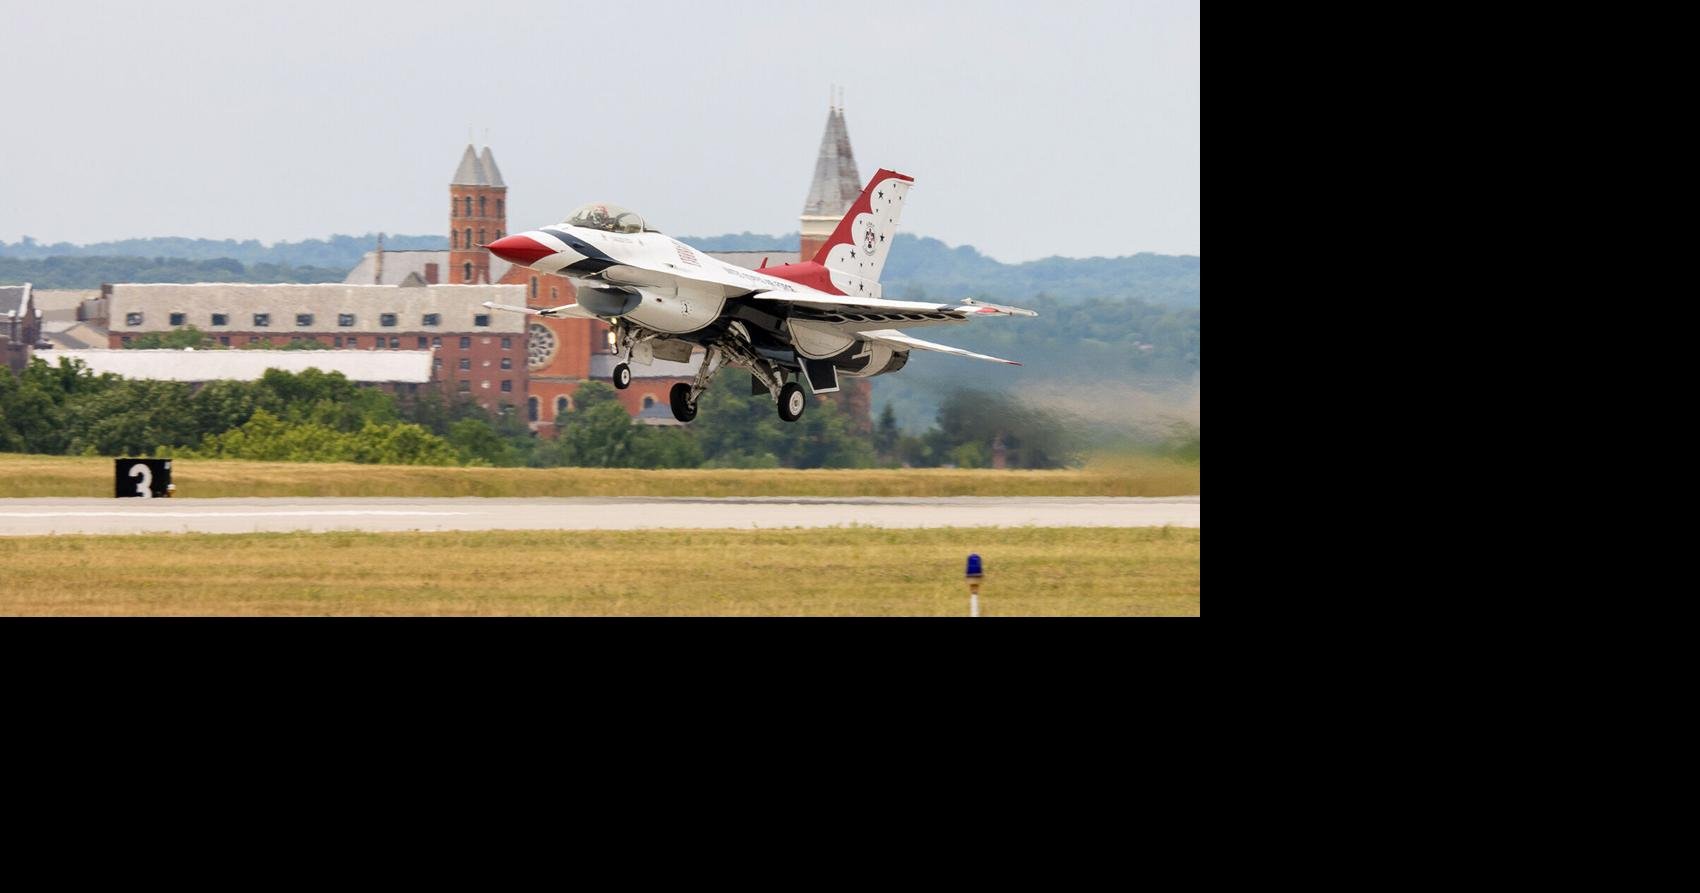 Shop 'n Save Westmoreland Airshow ready for takeoff Local News